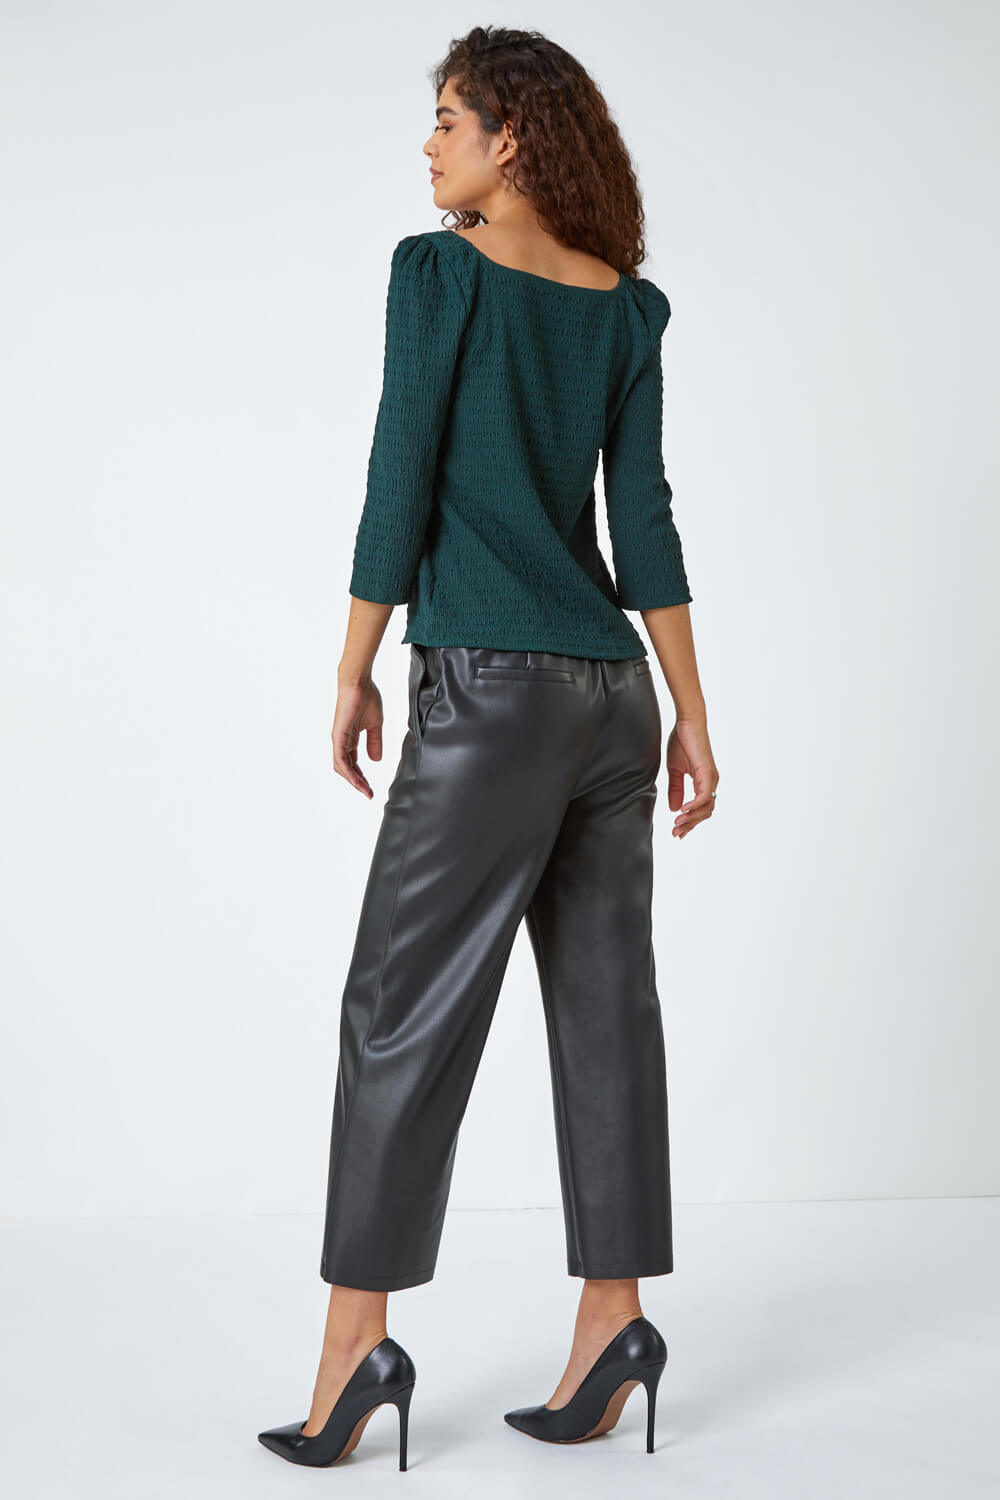 Forest  Textured Ruched Stretch Top, Image 3 of 5